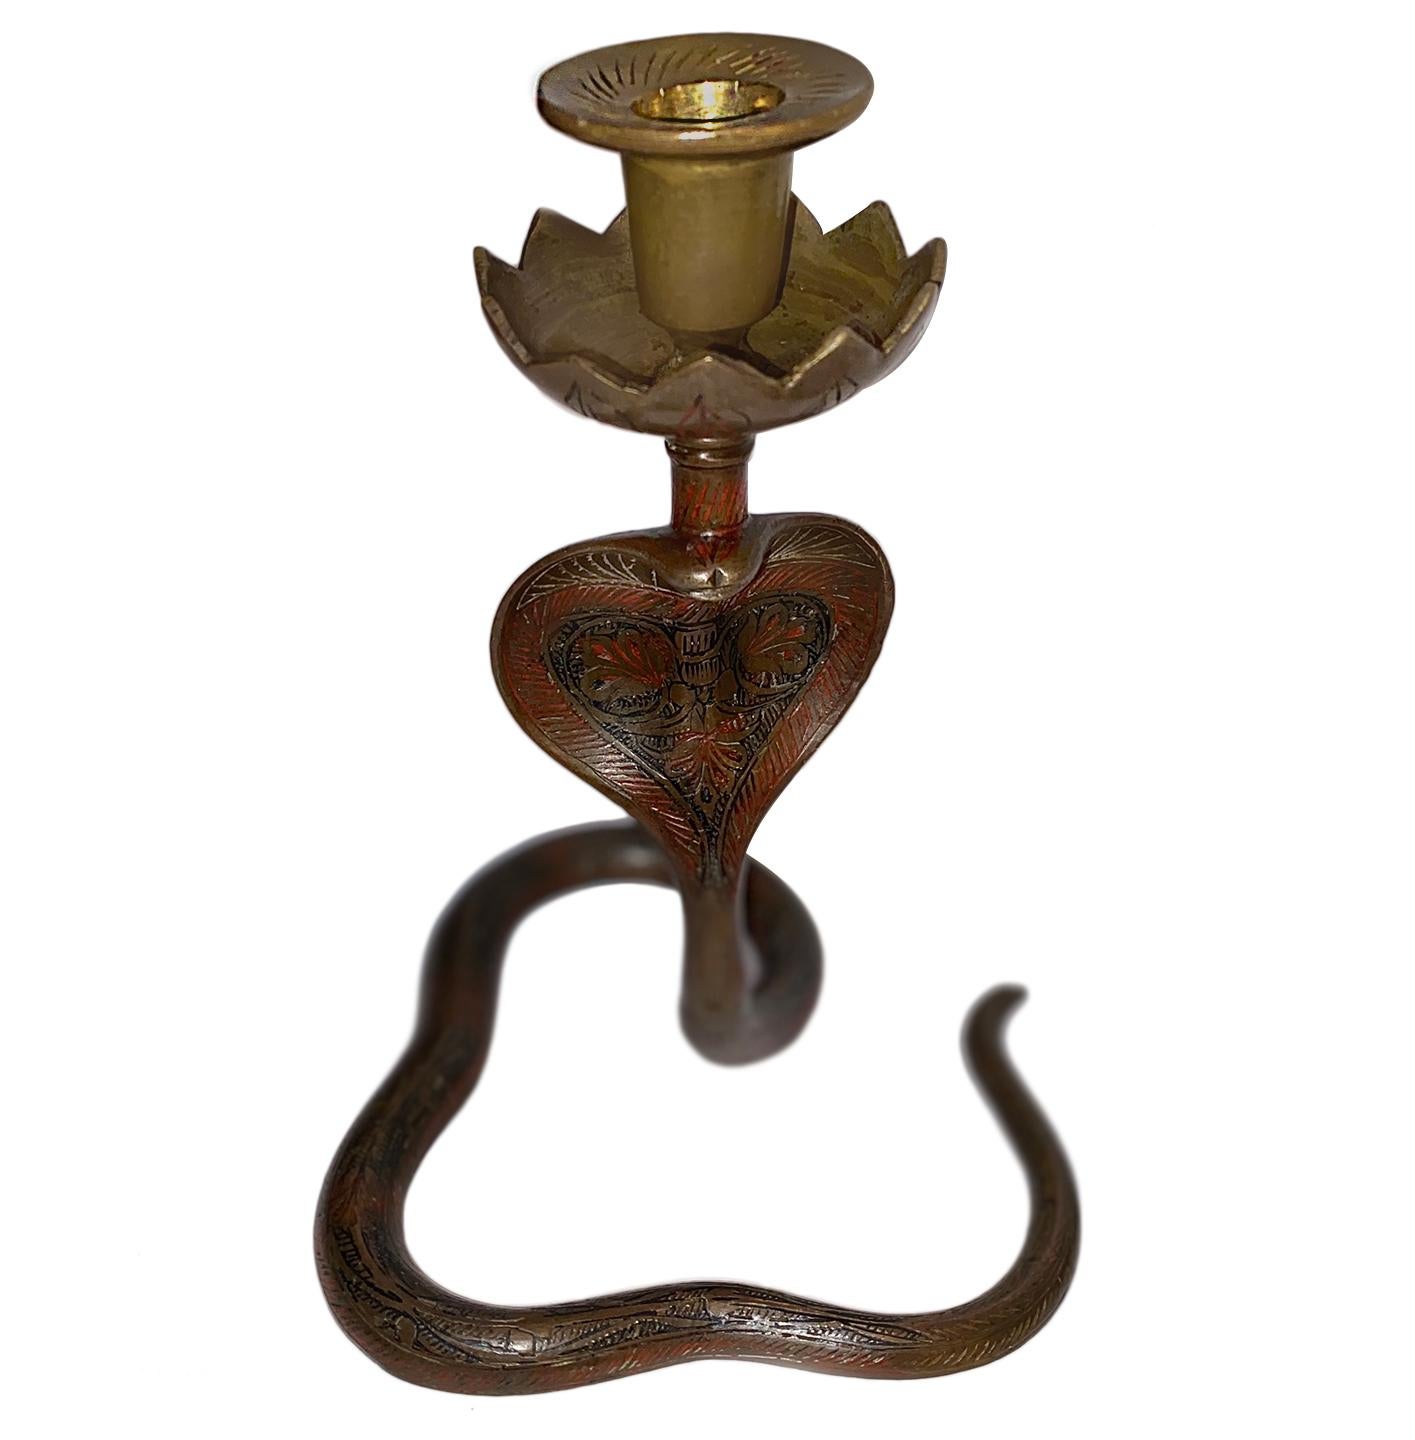 Pair of circa 1940's Moroccan brass cobra shaped candlesticks.

Measurements:
Height of body: 8